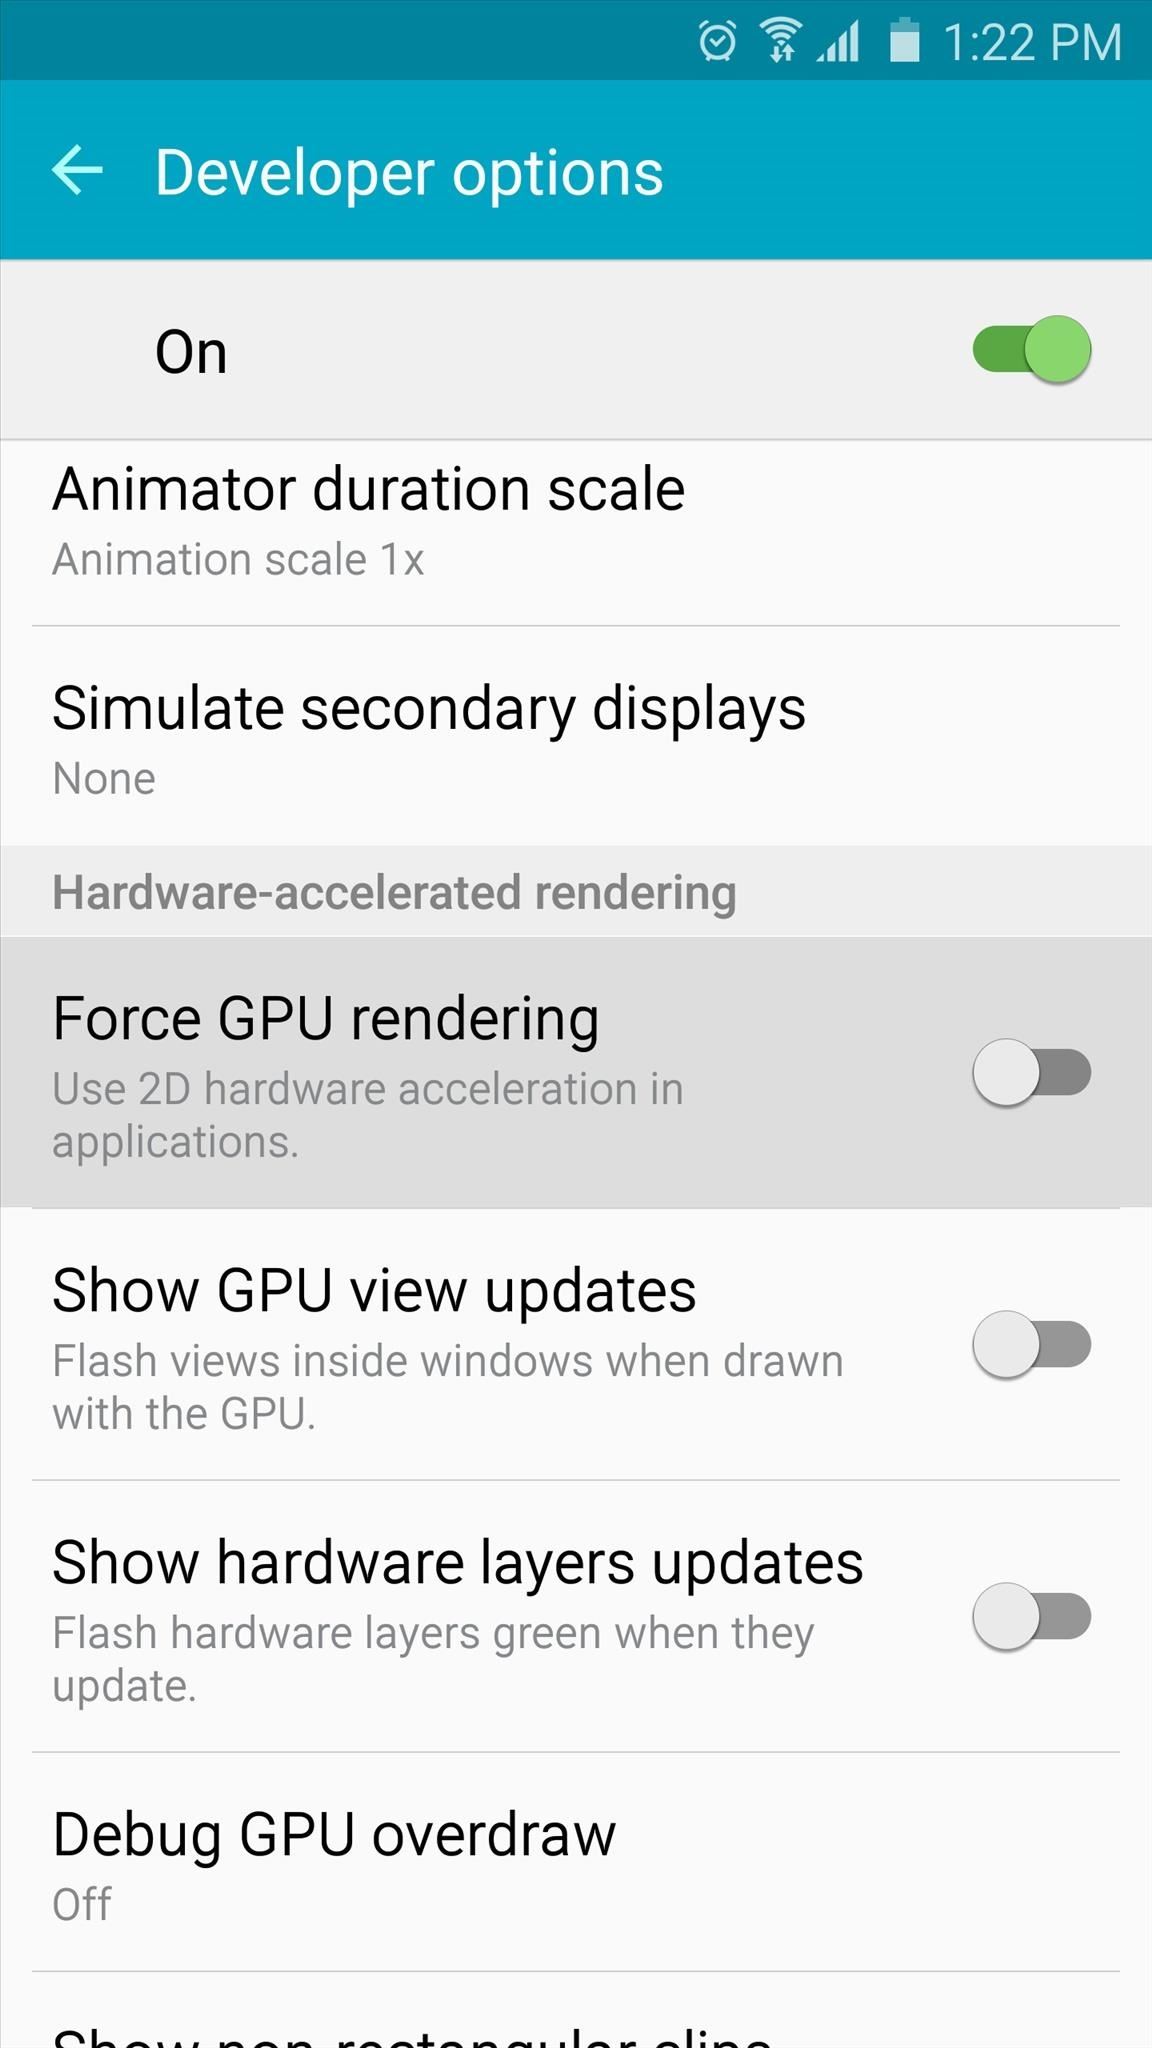 15 Reasons to Unlock Developer Options on Your Android